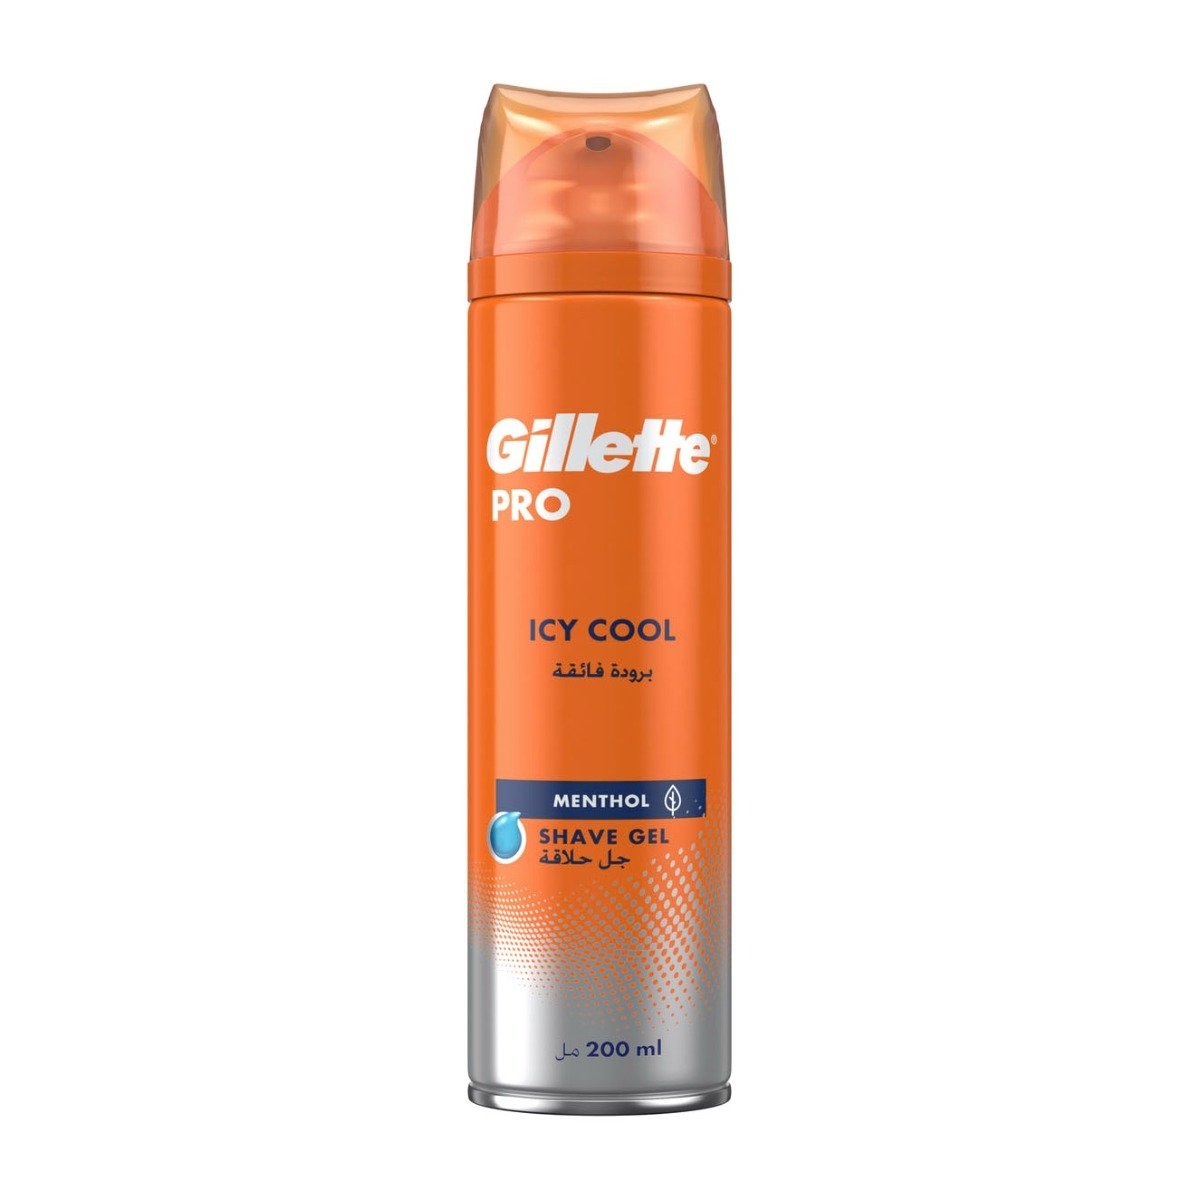 Gillette Pro Icy Cool Menthol Shave Gel - Bloom Pharmacy